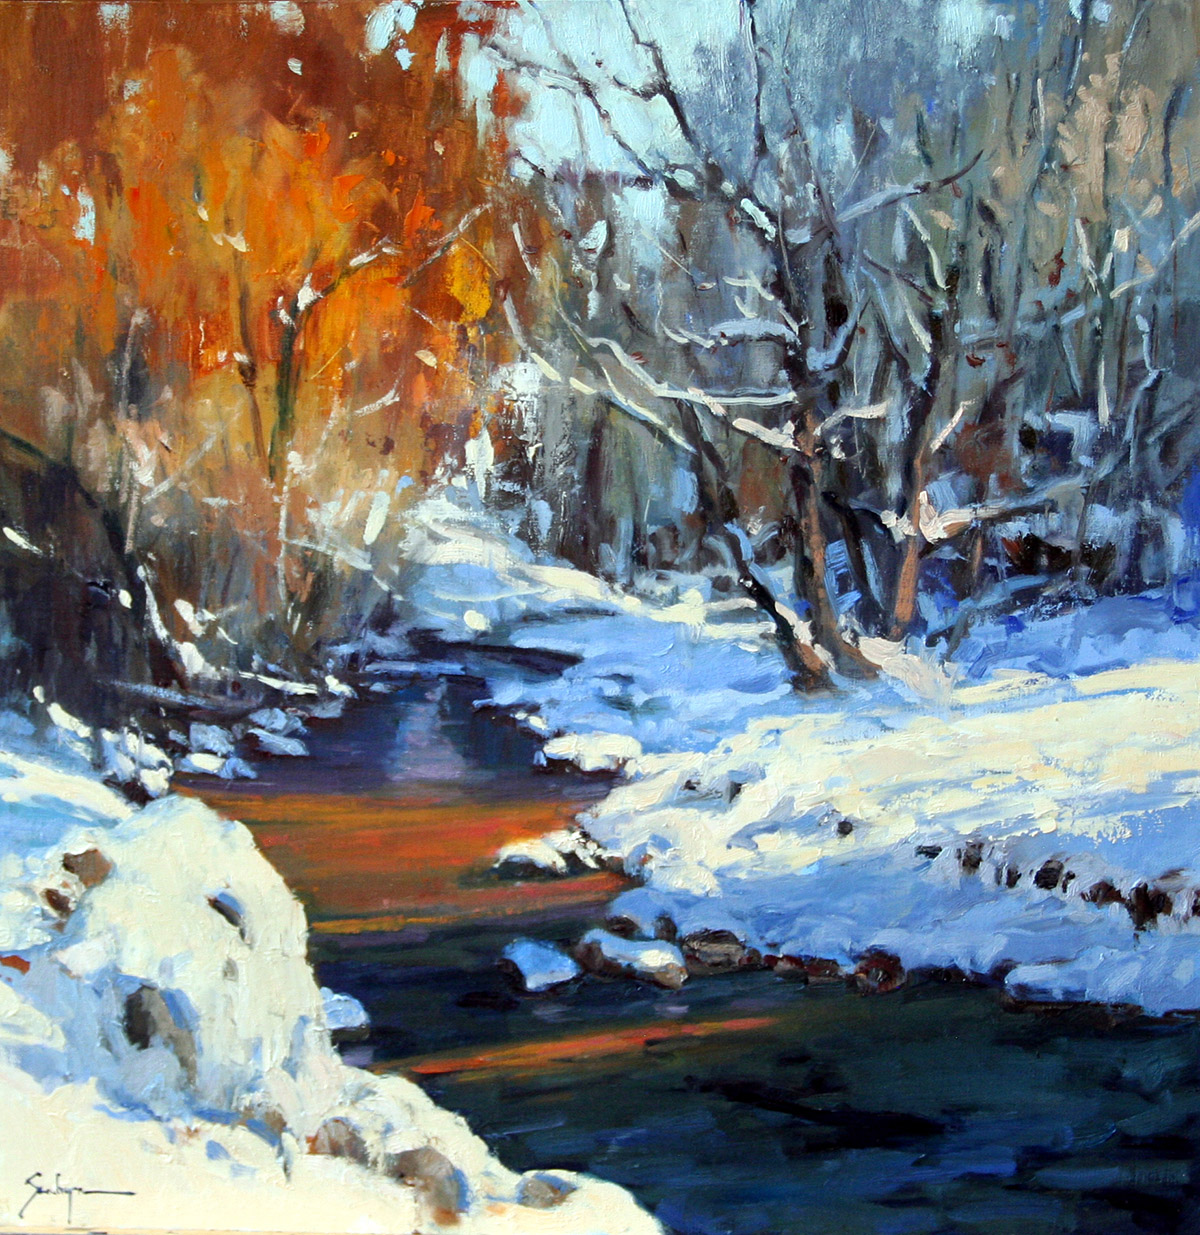 oil painting of winter scene with a river through. Tree on left side still has bright fall colors 